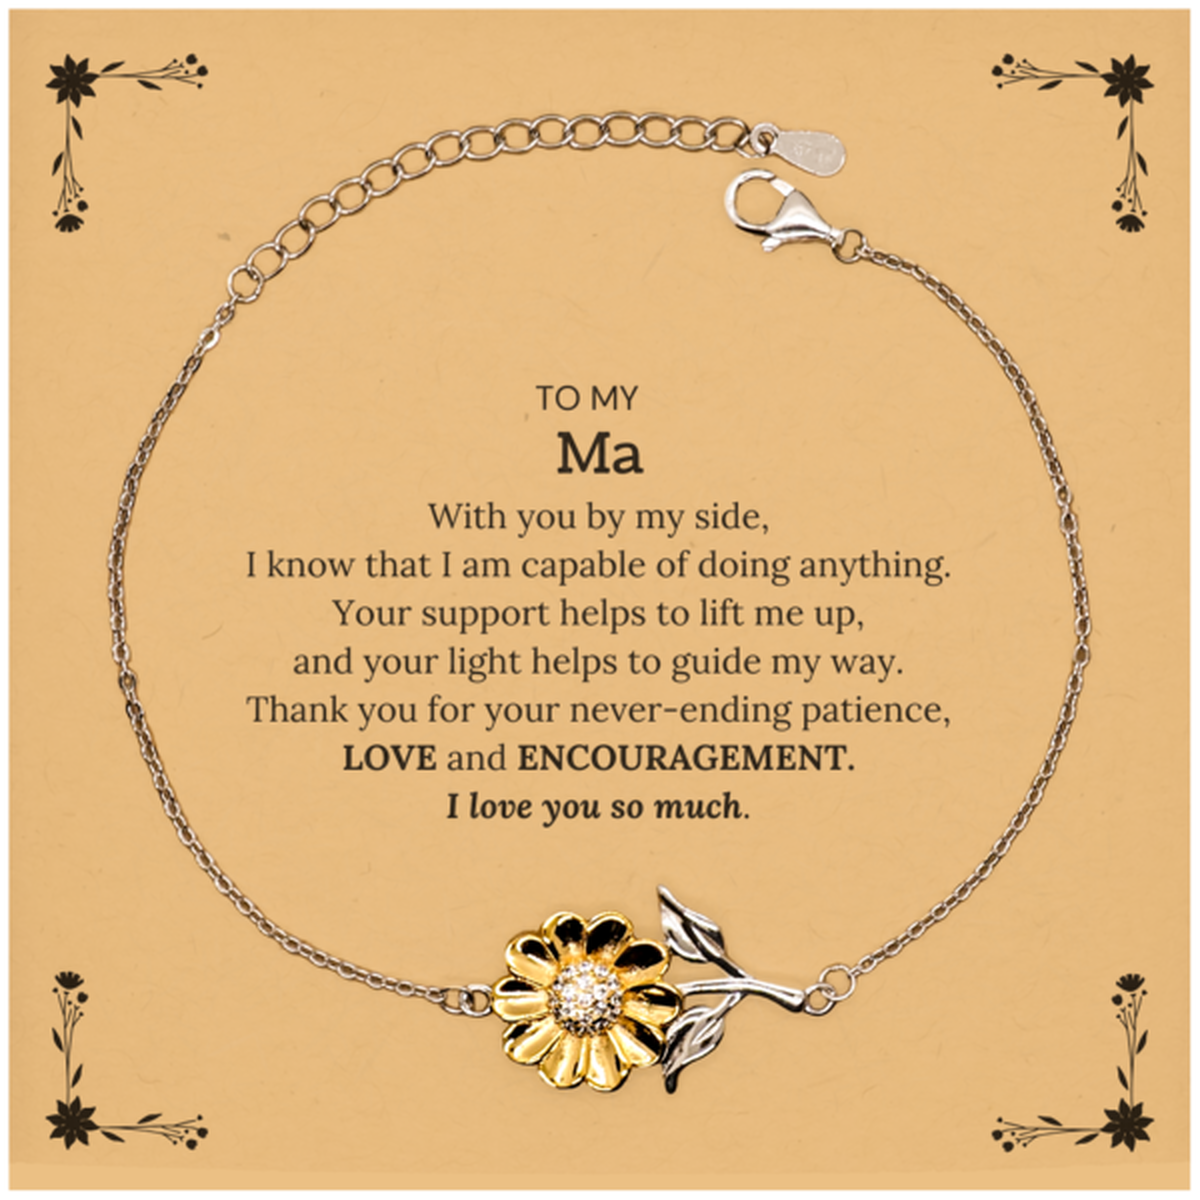 Appreciation Ma Sunflower Bracelet Gifts, To My Ma Birthday Christmas Wedding Keepsake Gifts for Ma With you by my side, I know that I am capable of doing anything. I love you so much